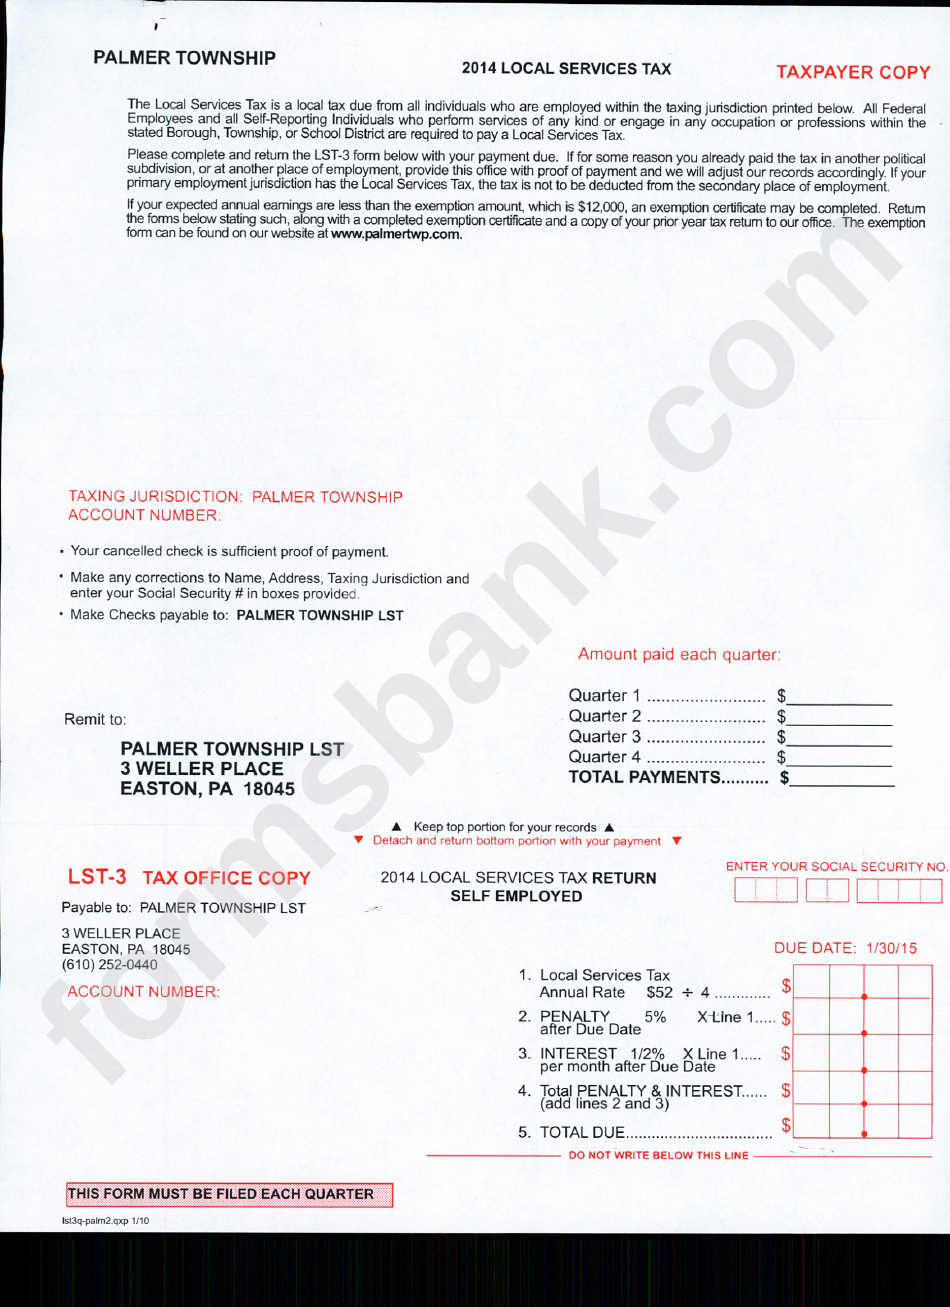 Form Lst-3 - Local Services Tax Return Self Employed - Palmer Township Lst - 2014